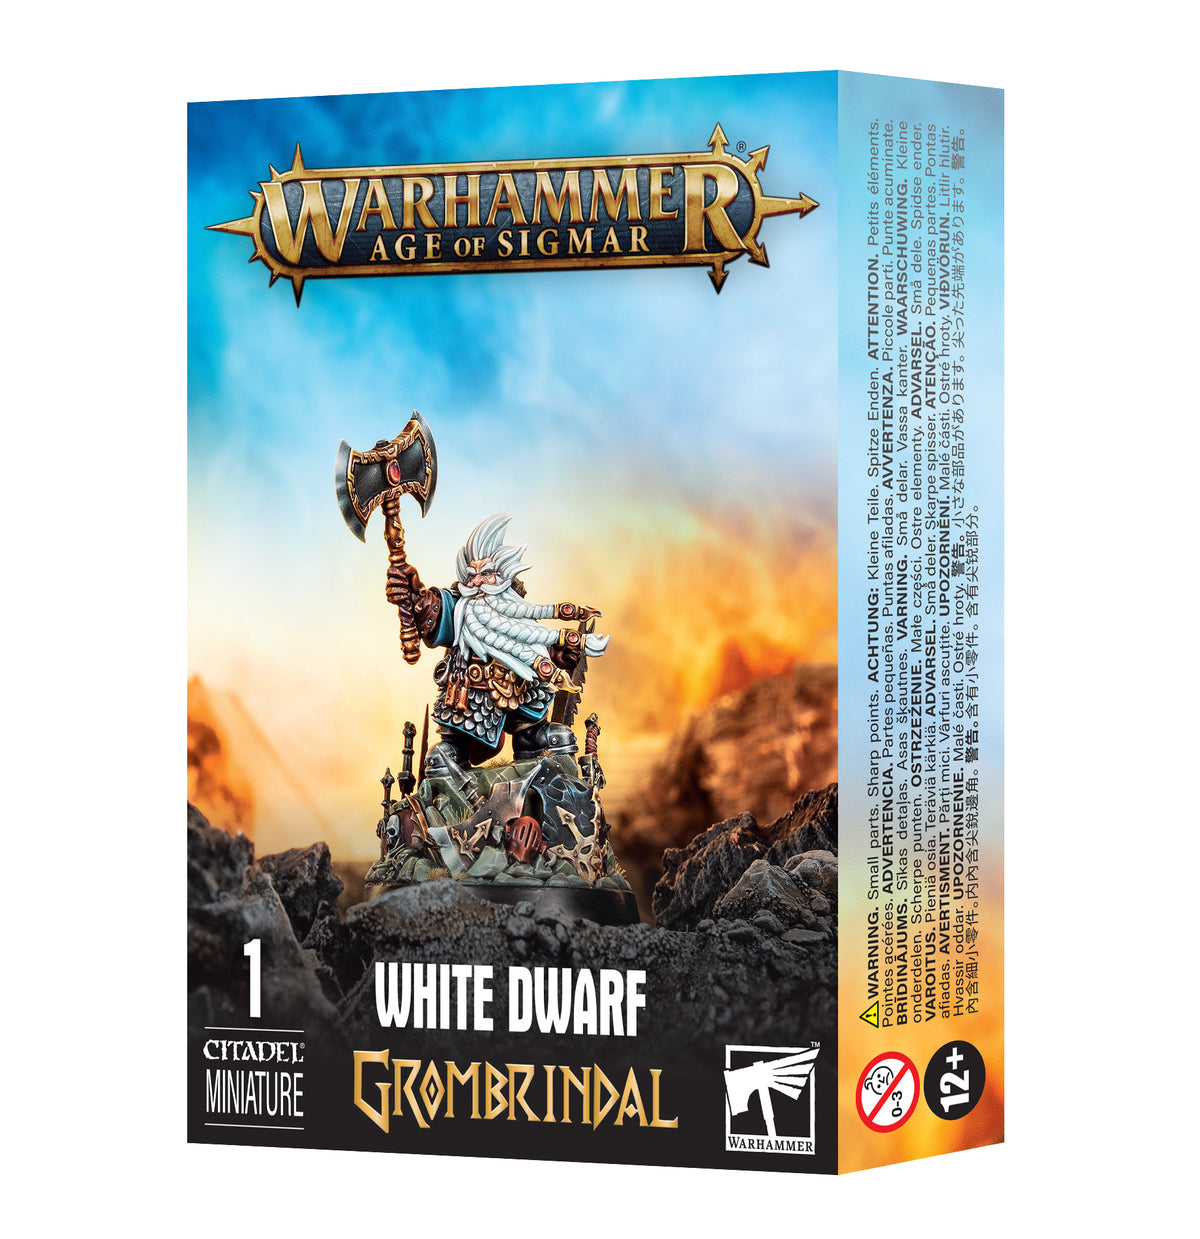 Grombrindal: The White Dwarf (Warhammer Age of Sigmar)